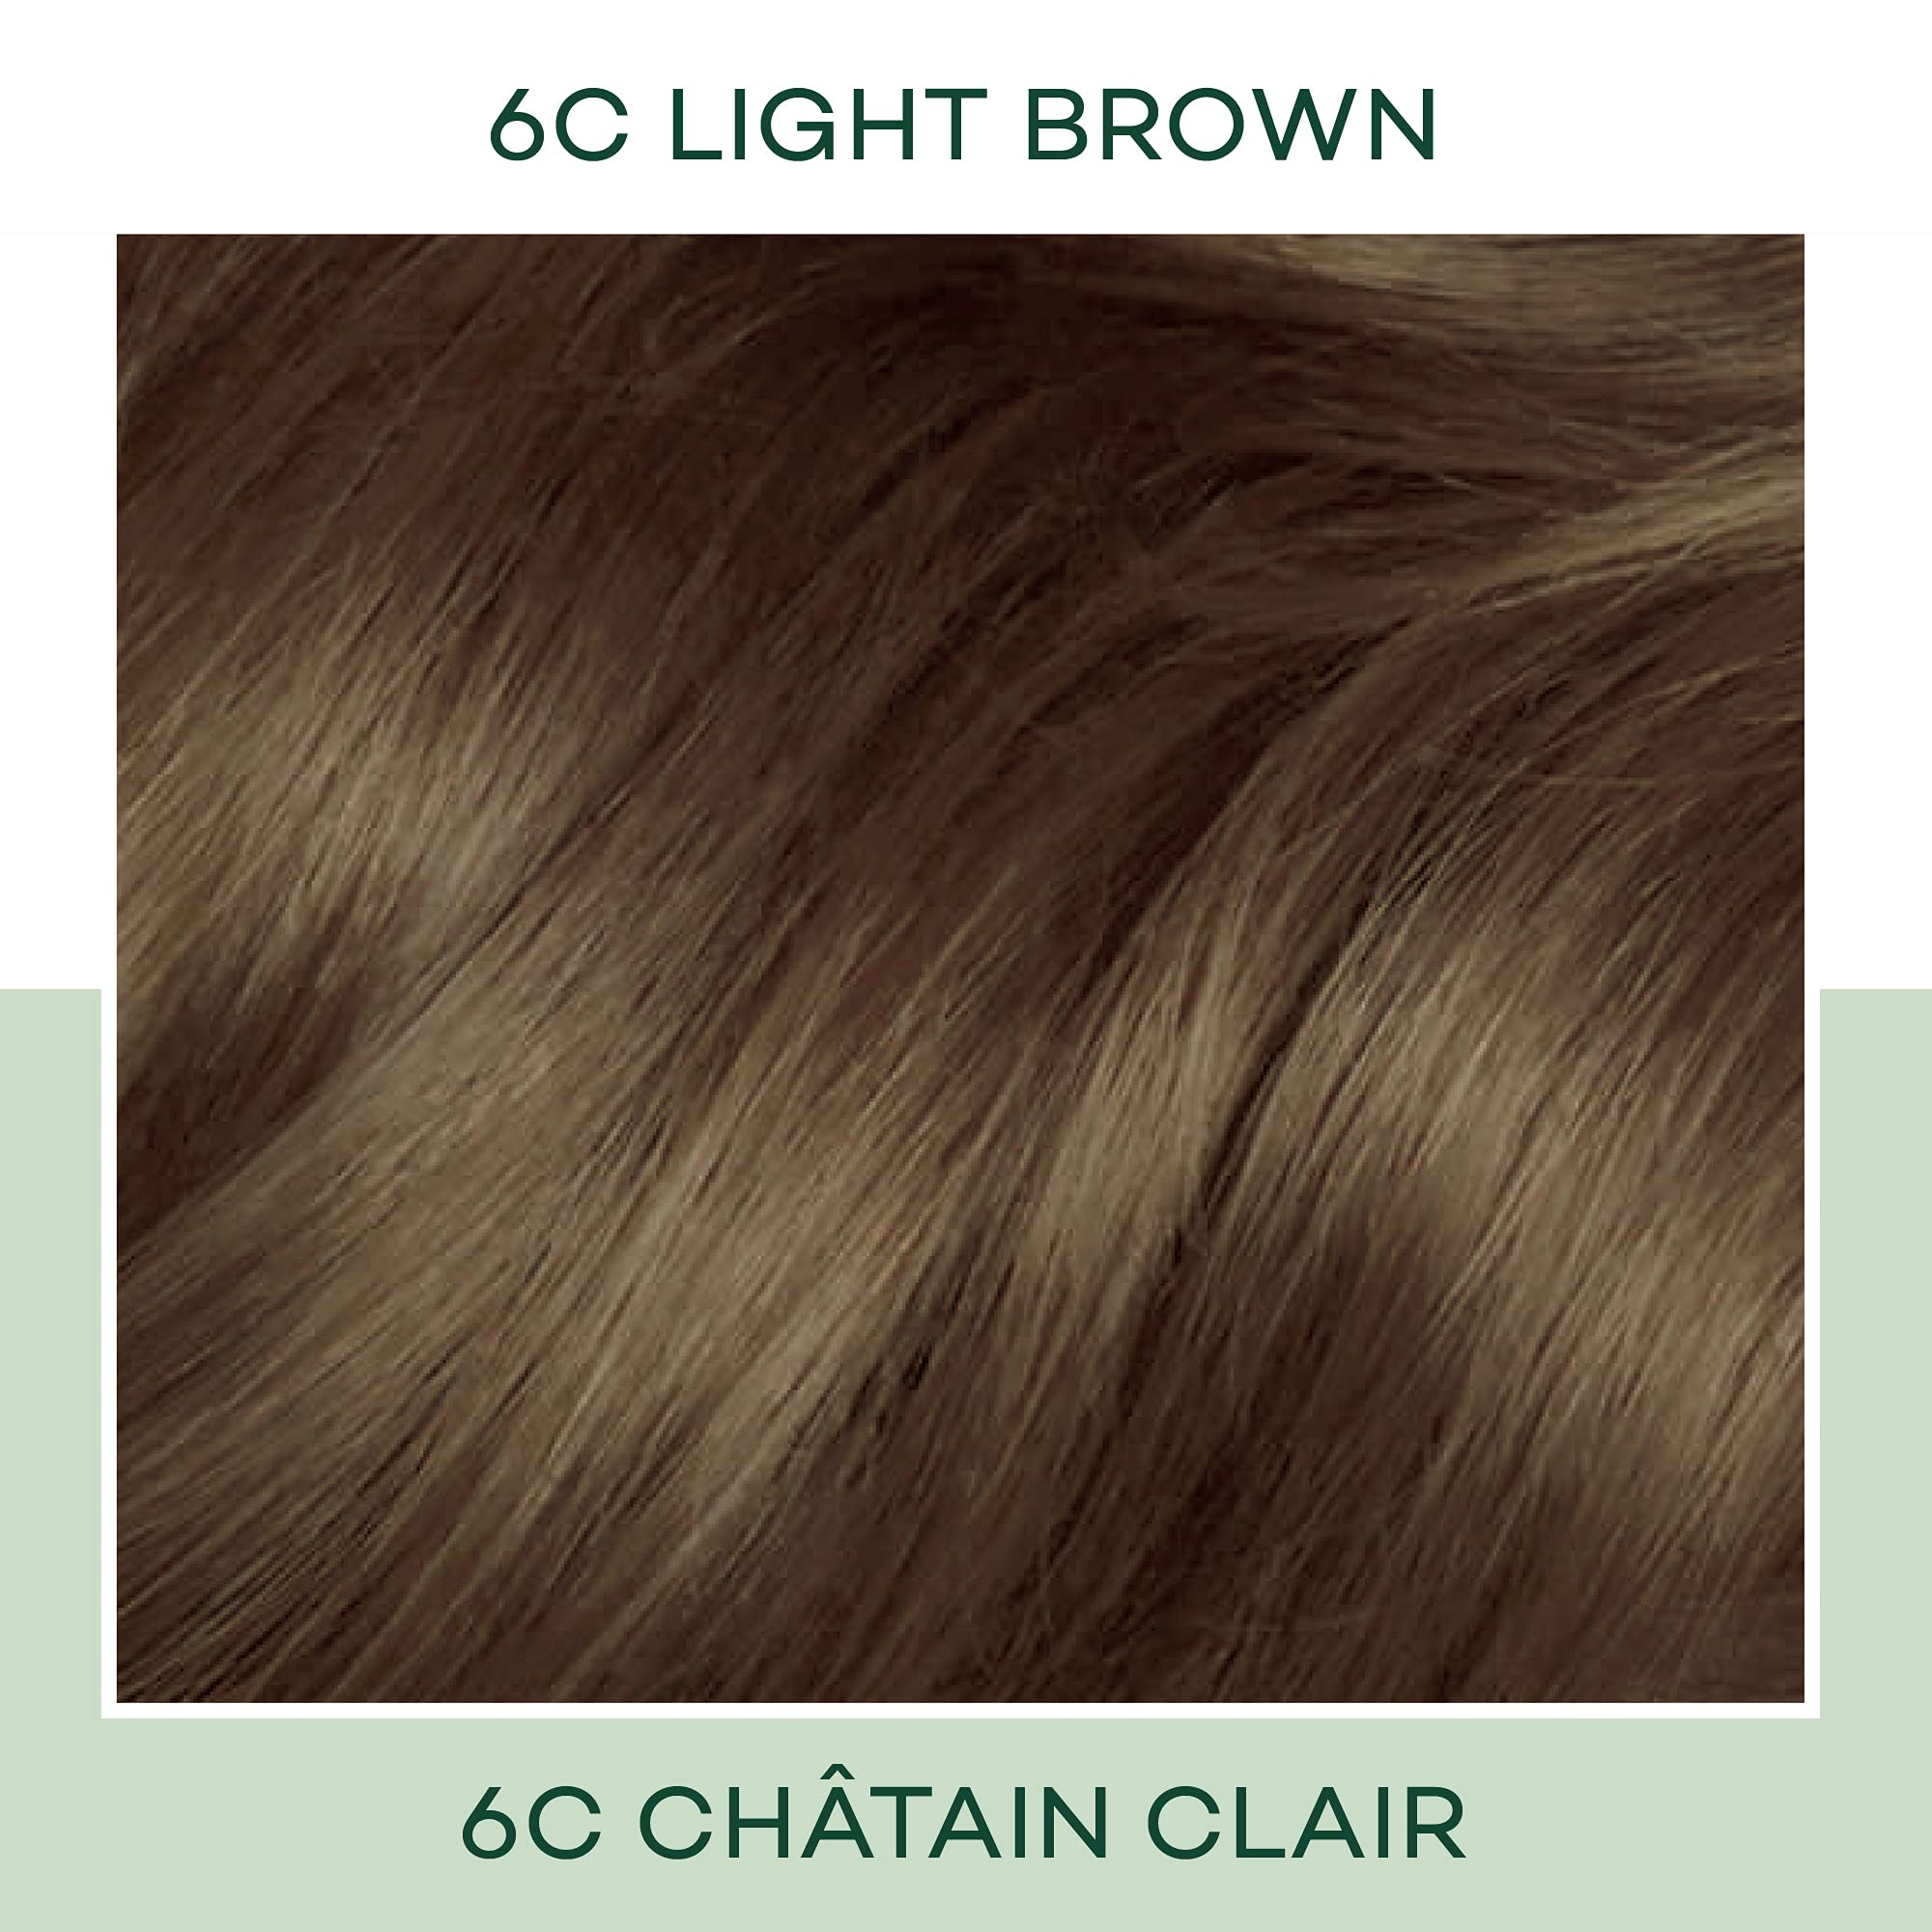 Clairol Natural Instincts Demi-Permanent Hair Dye, 6C Light Brown Hair Color, Pack of 1